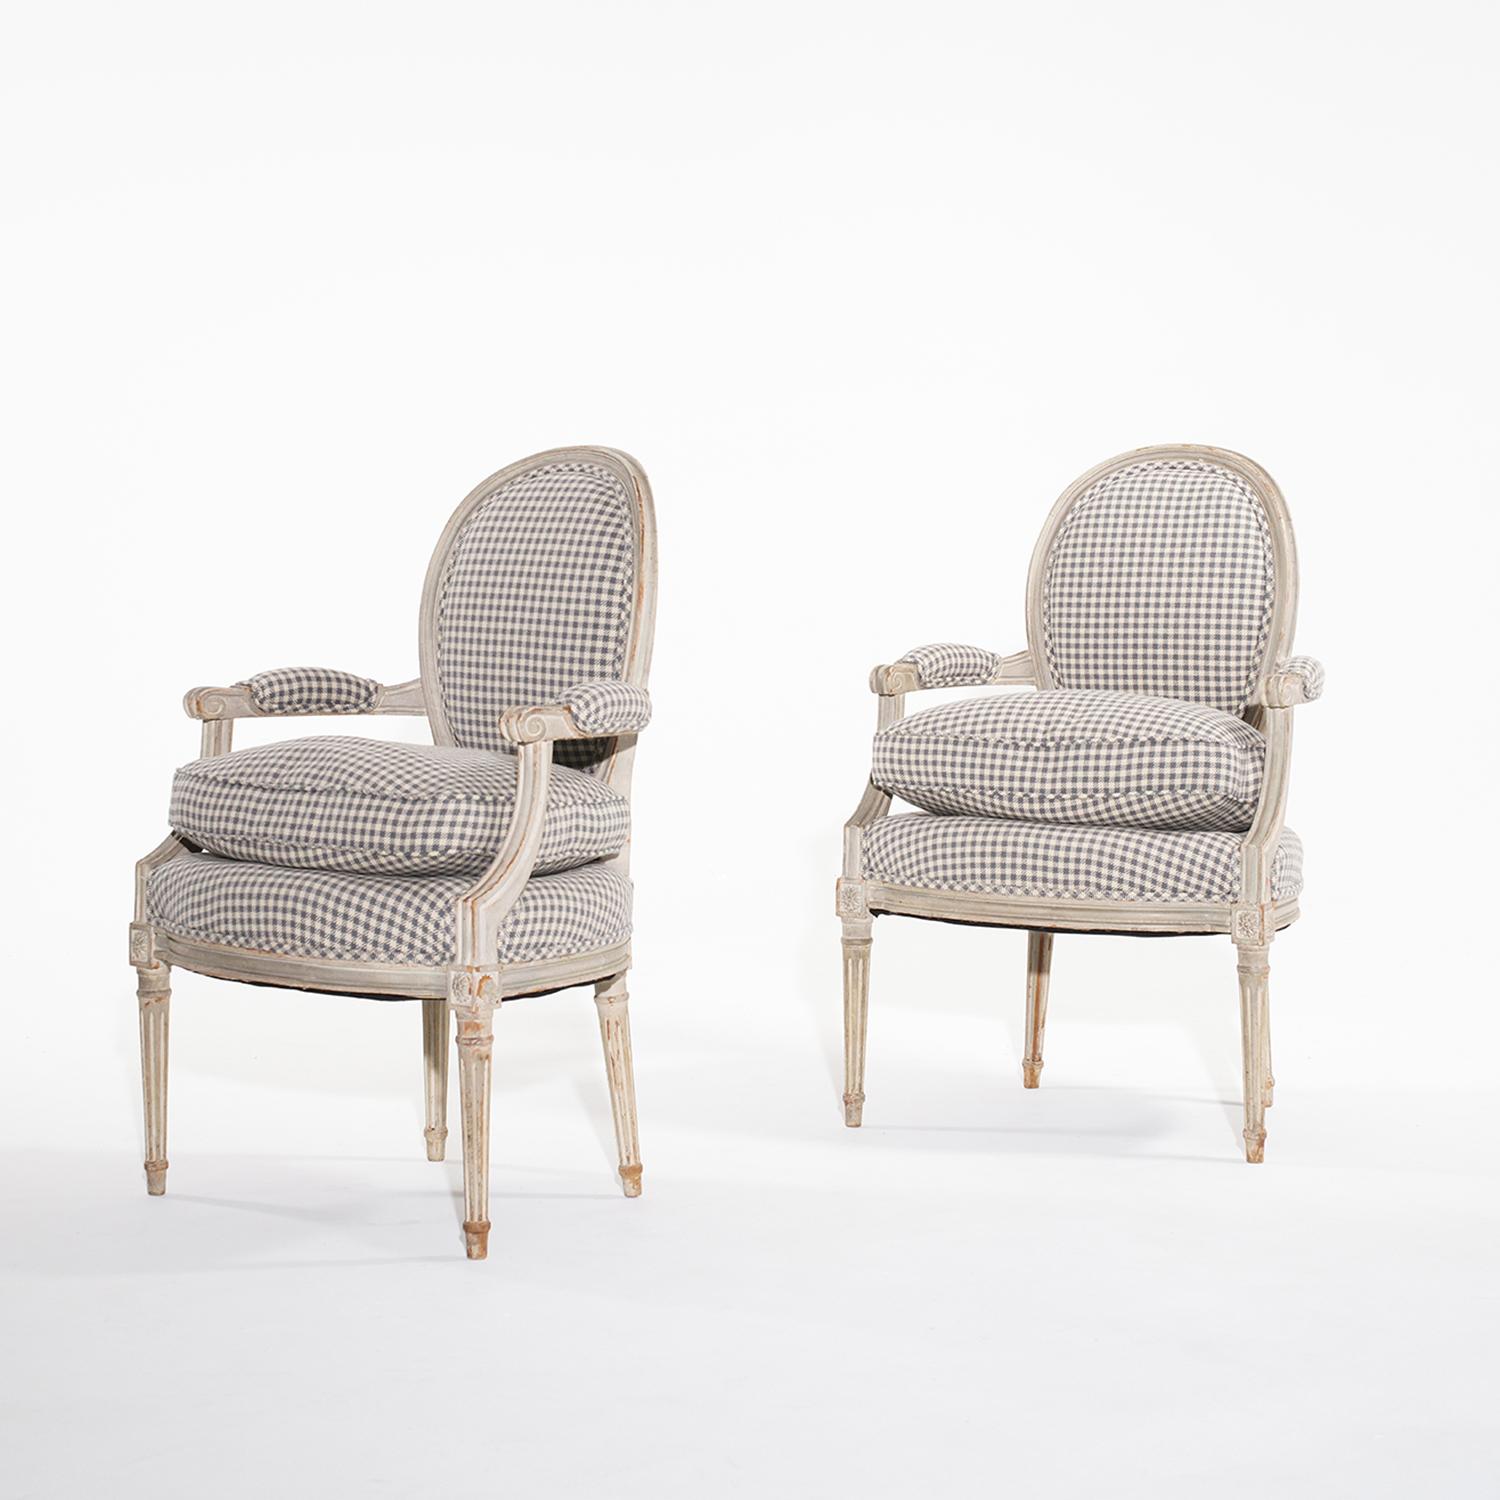 A light-grey, antique Swedish Gustavian pair of armchairs with a loose seat cushion, made of hand crafted painted Pinewood in good condition. The curved shield back of the Scandinavian club chairs have an oval padded backrest particularized by a